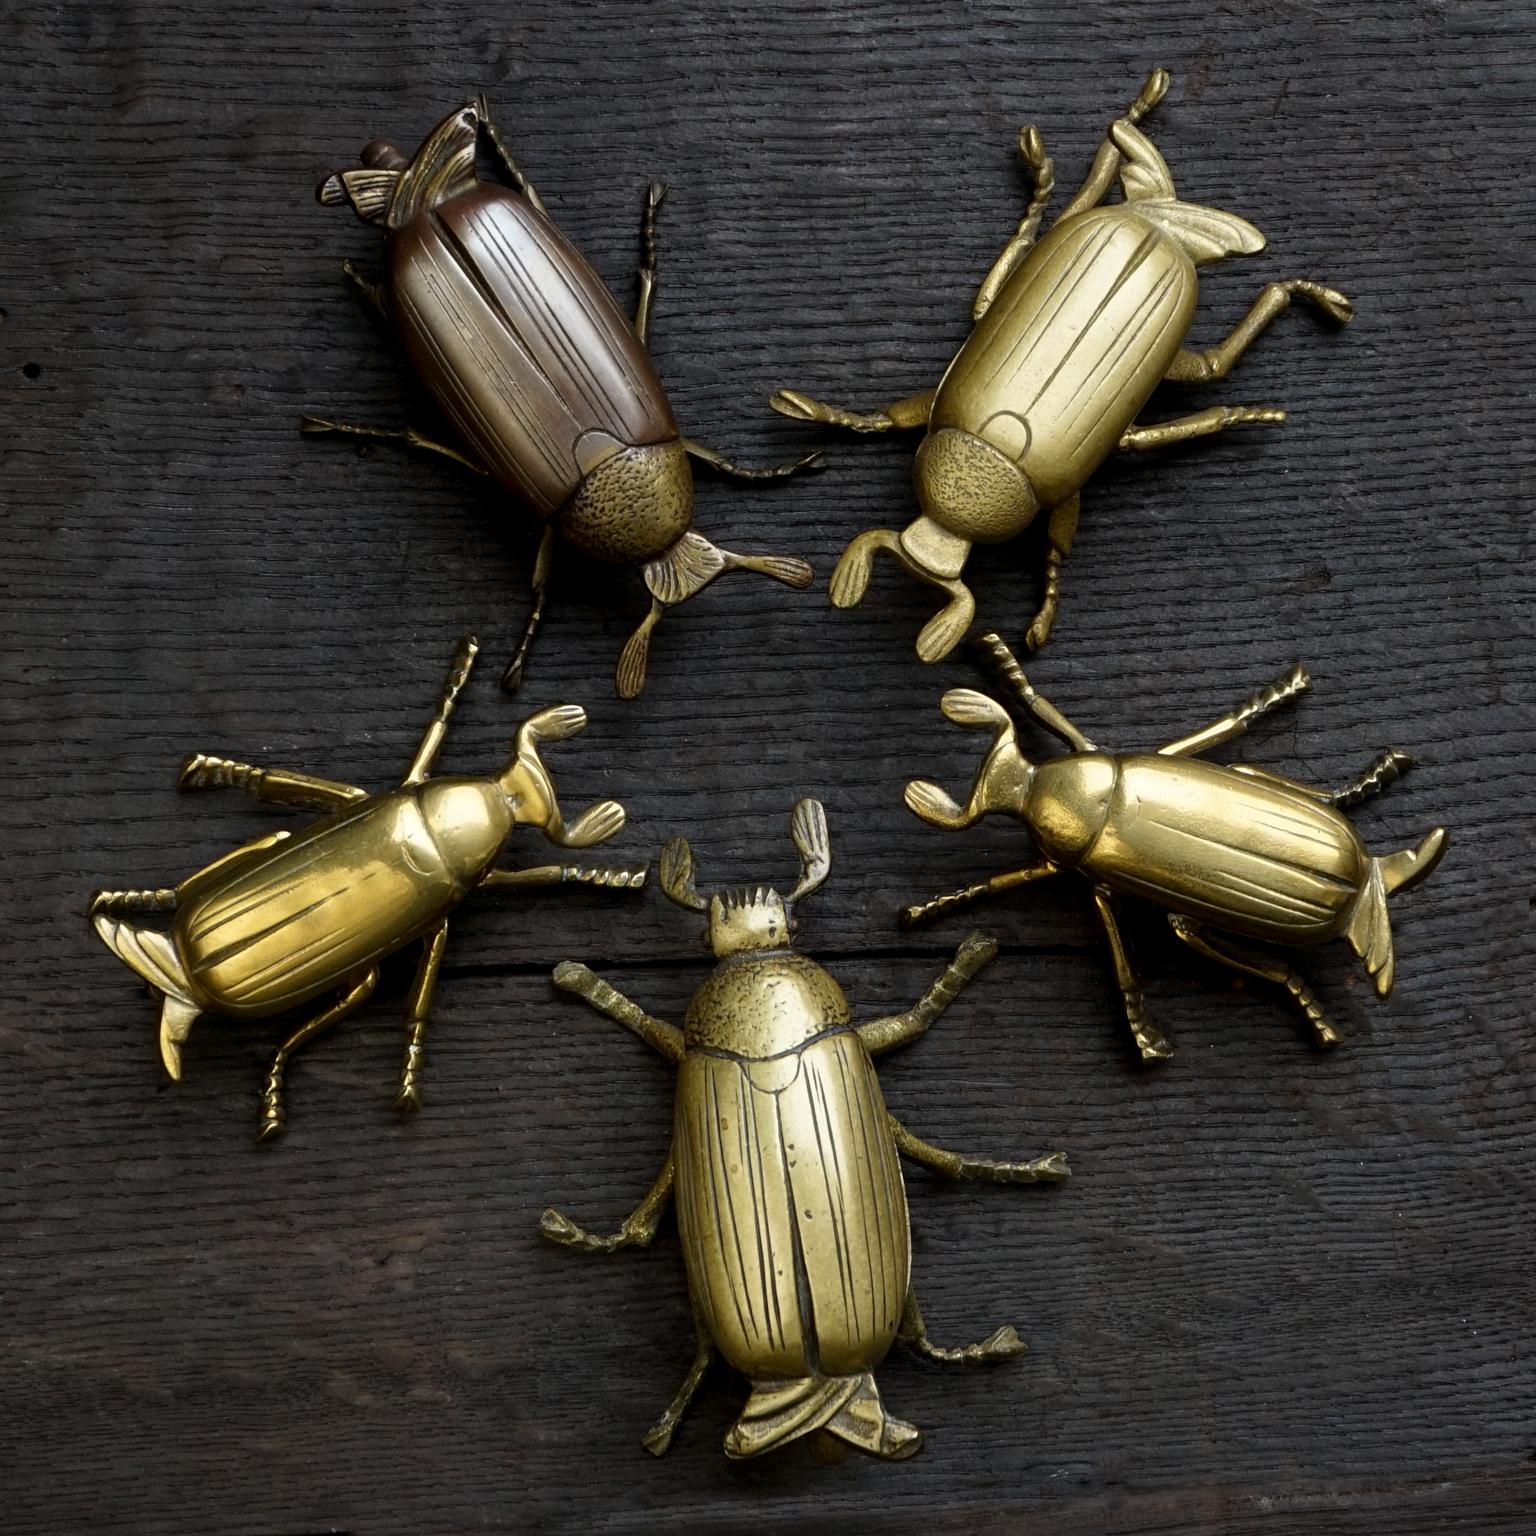 Collection of five vintage mid-century crawly critters in brass.
These cute little beetles where probably originally used as ashtray, now all clean and shiny to decorate a corner in your home or to adorn a stack of books.

All hinges of these